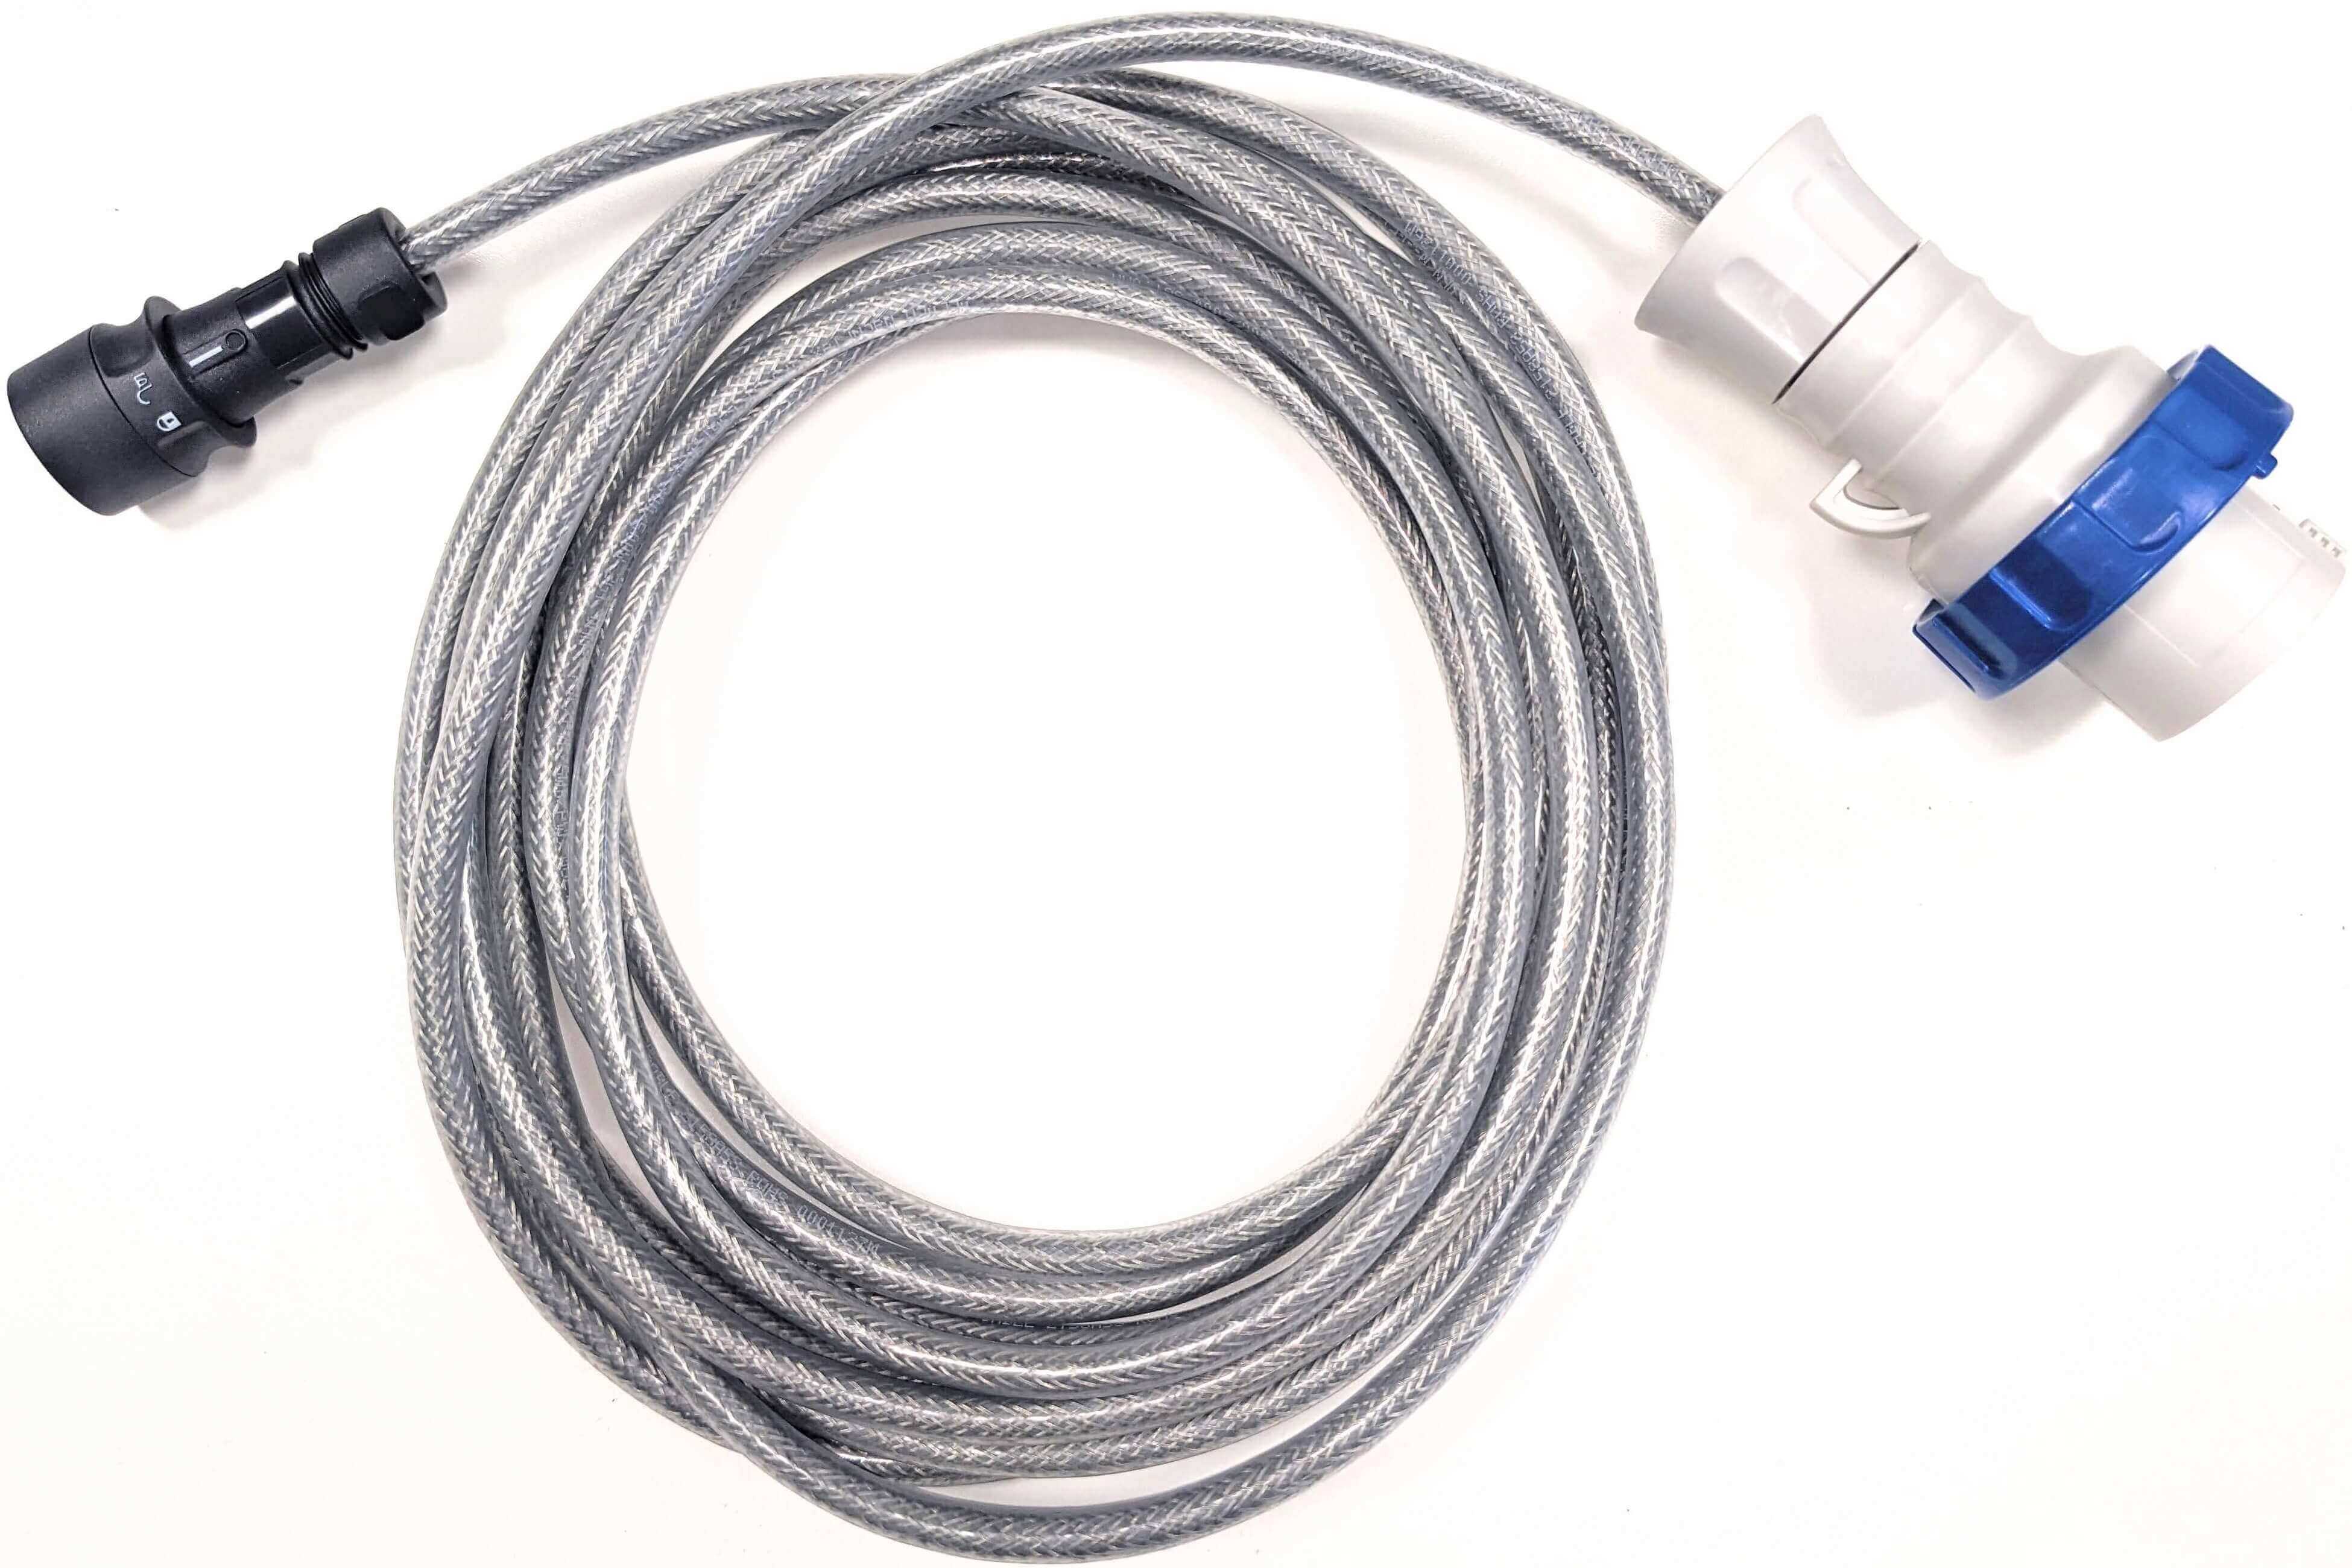 K-Cell/K-Mote AC power cable